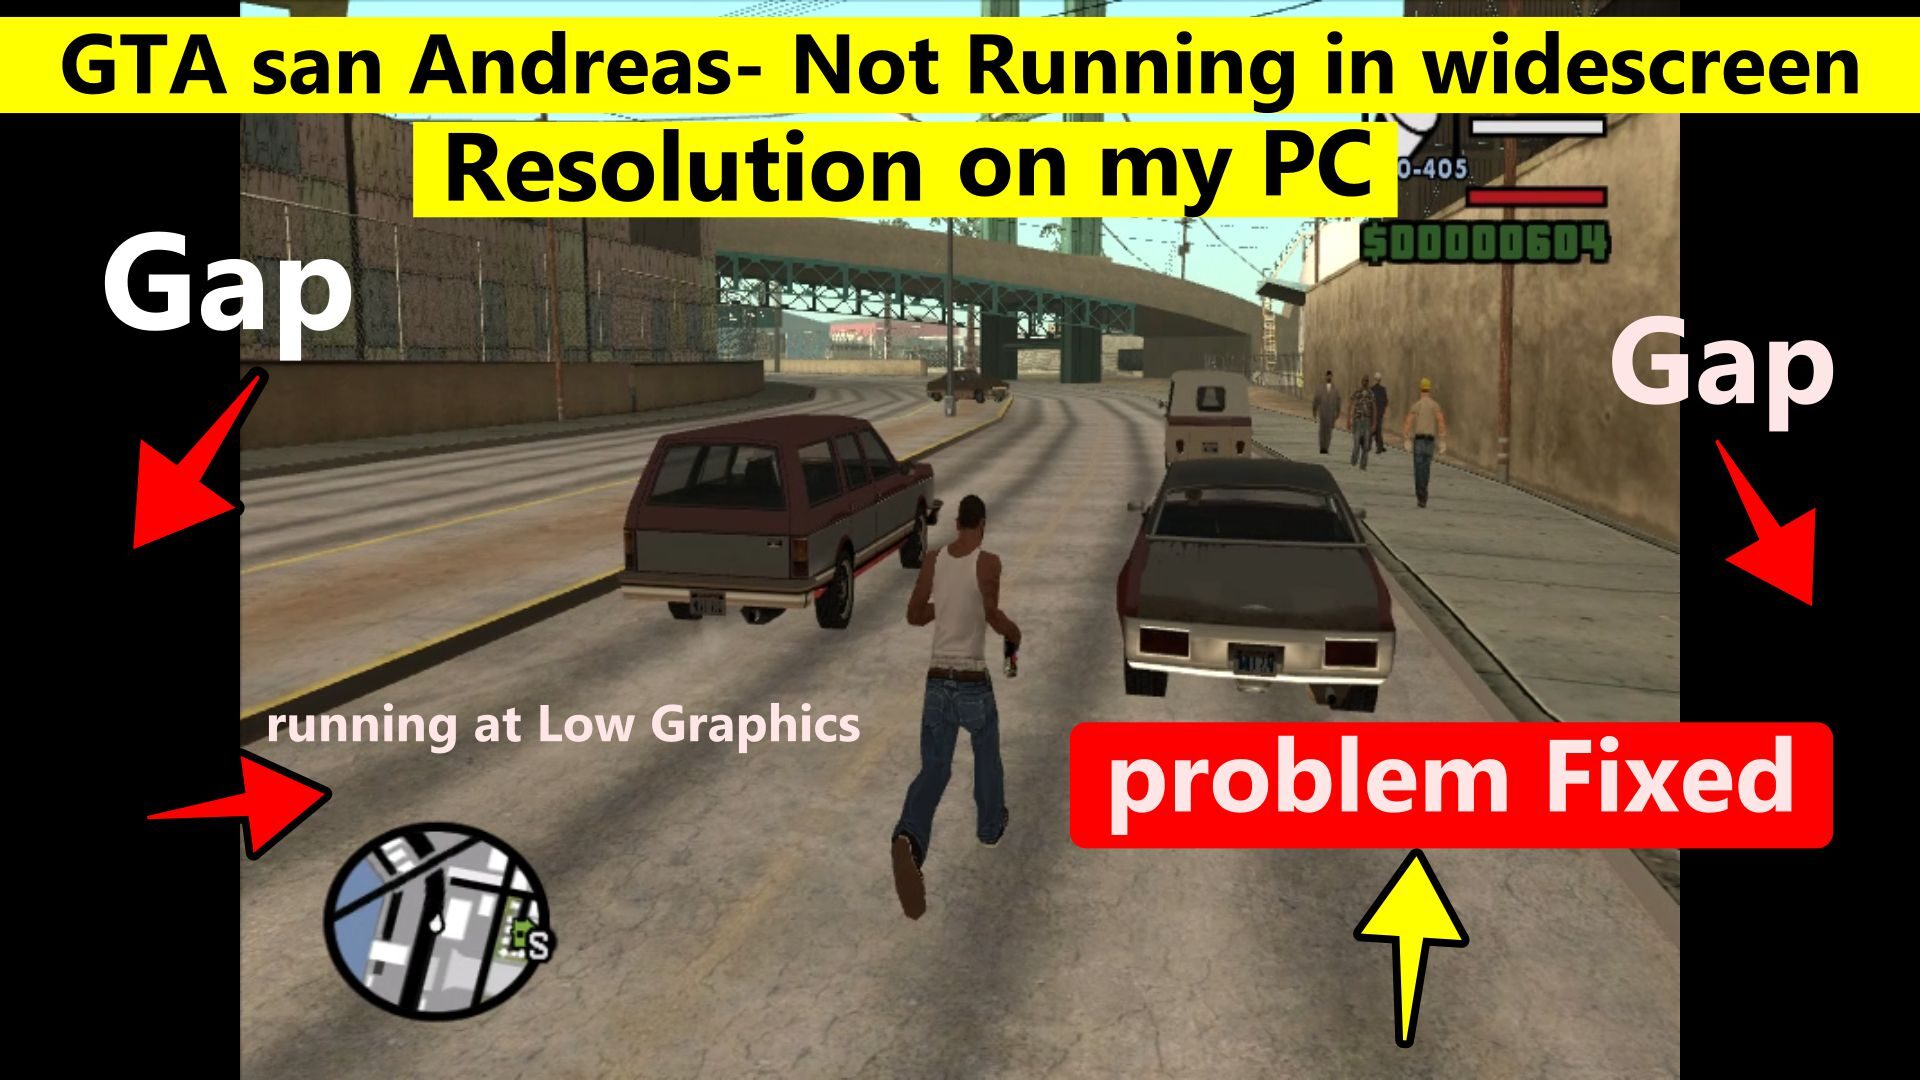 Fix - GTA san Andreas Not Running in widescreen Resolution on my PC